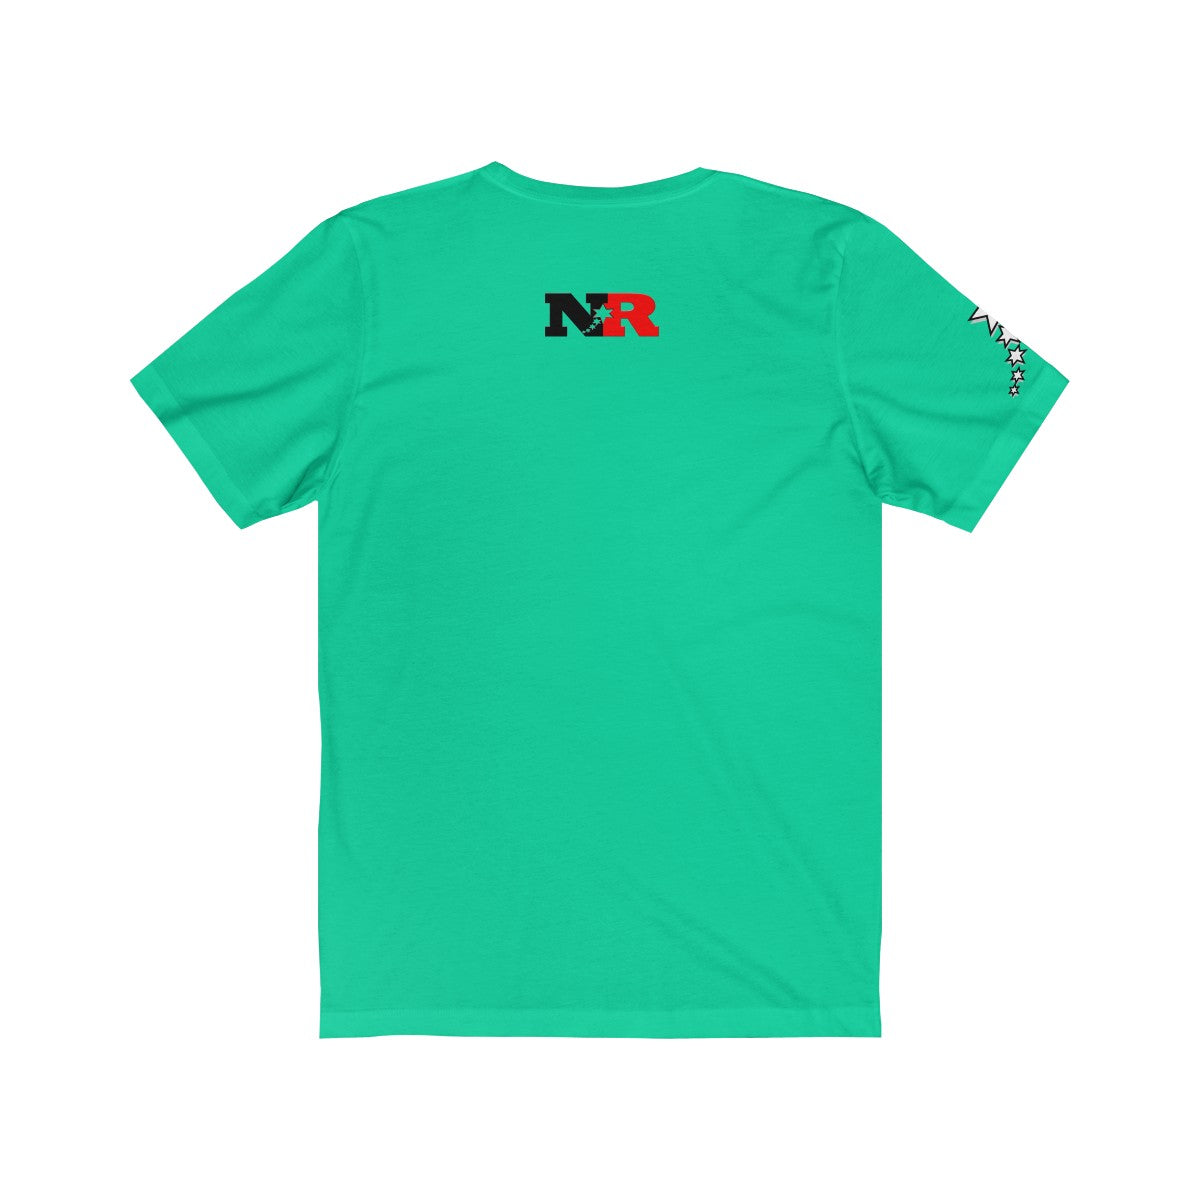 Unisex Jersey Short Sleeve Tee - There is only one Race